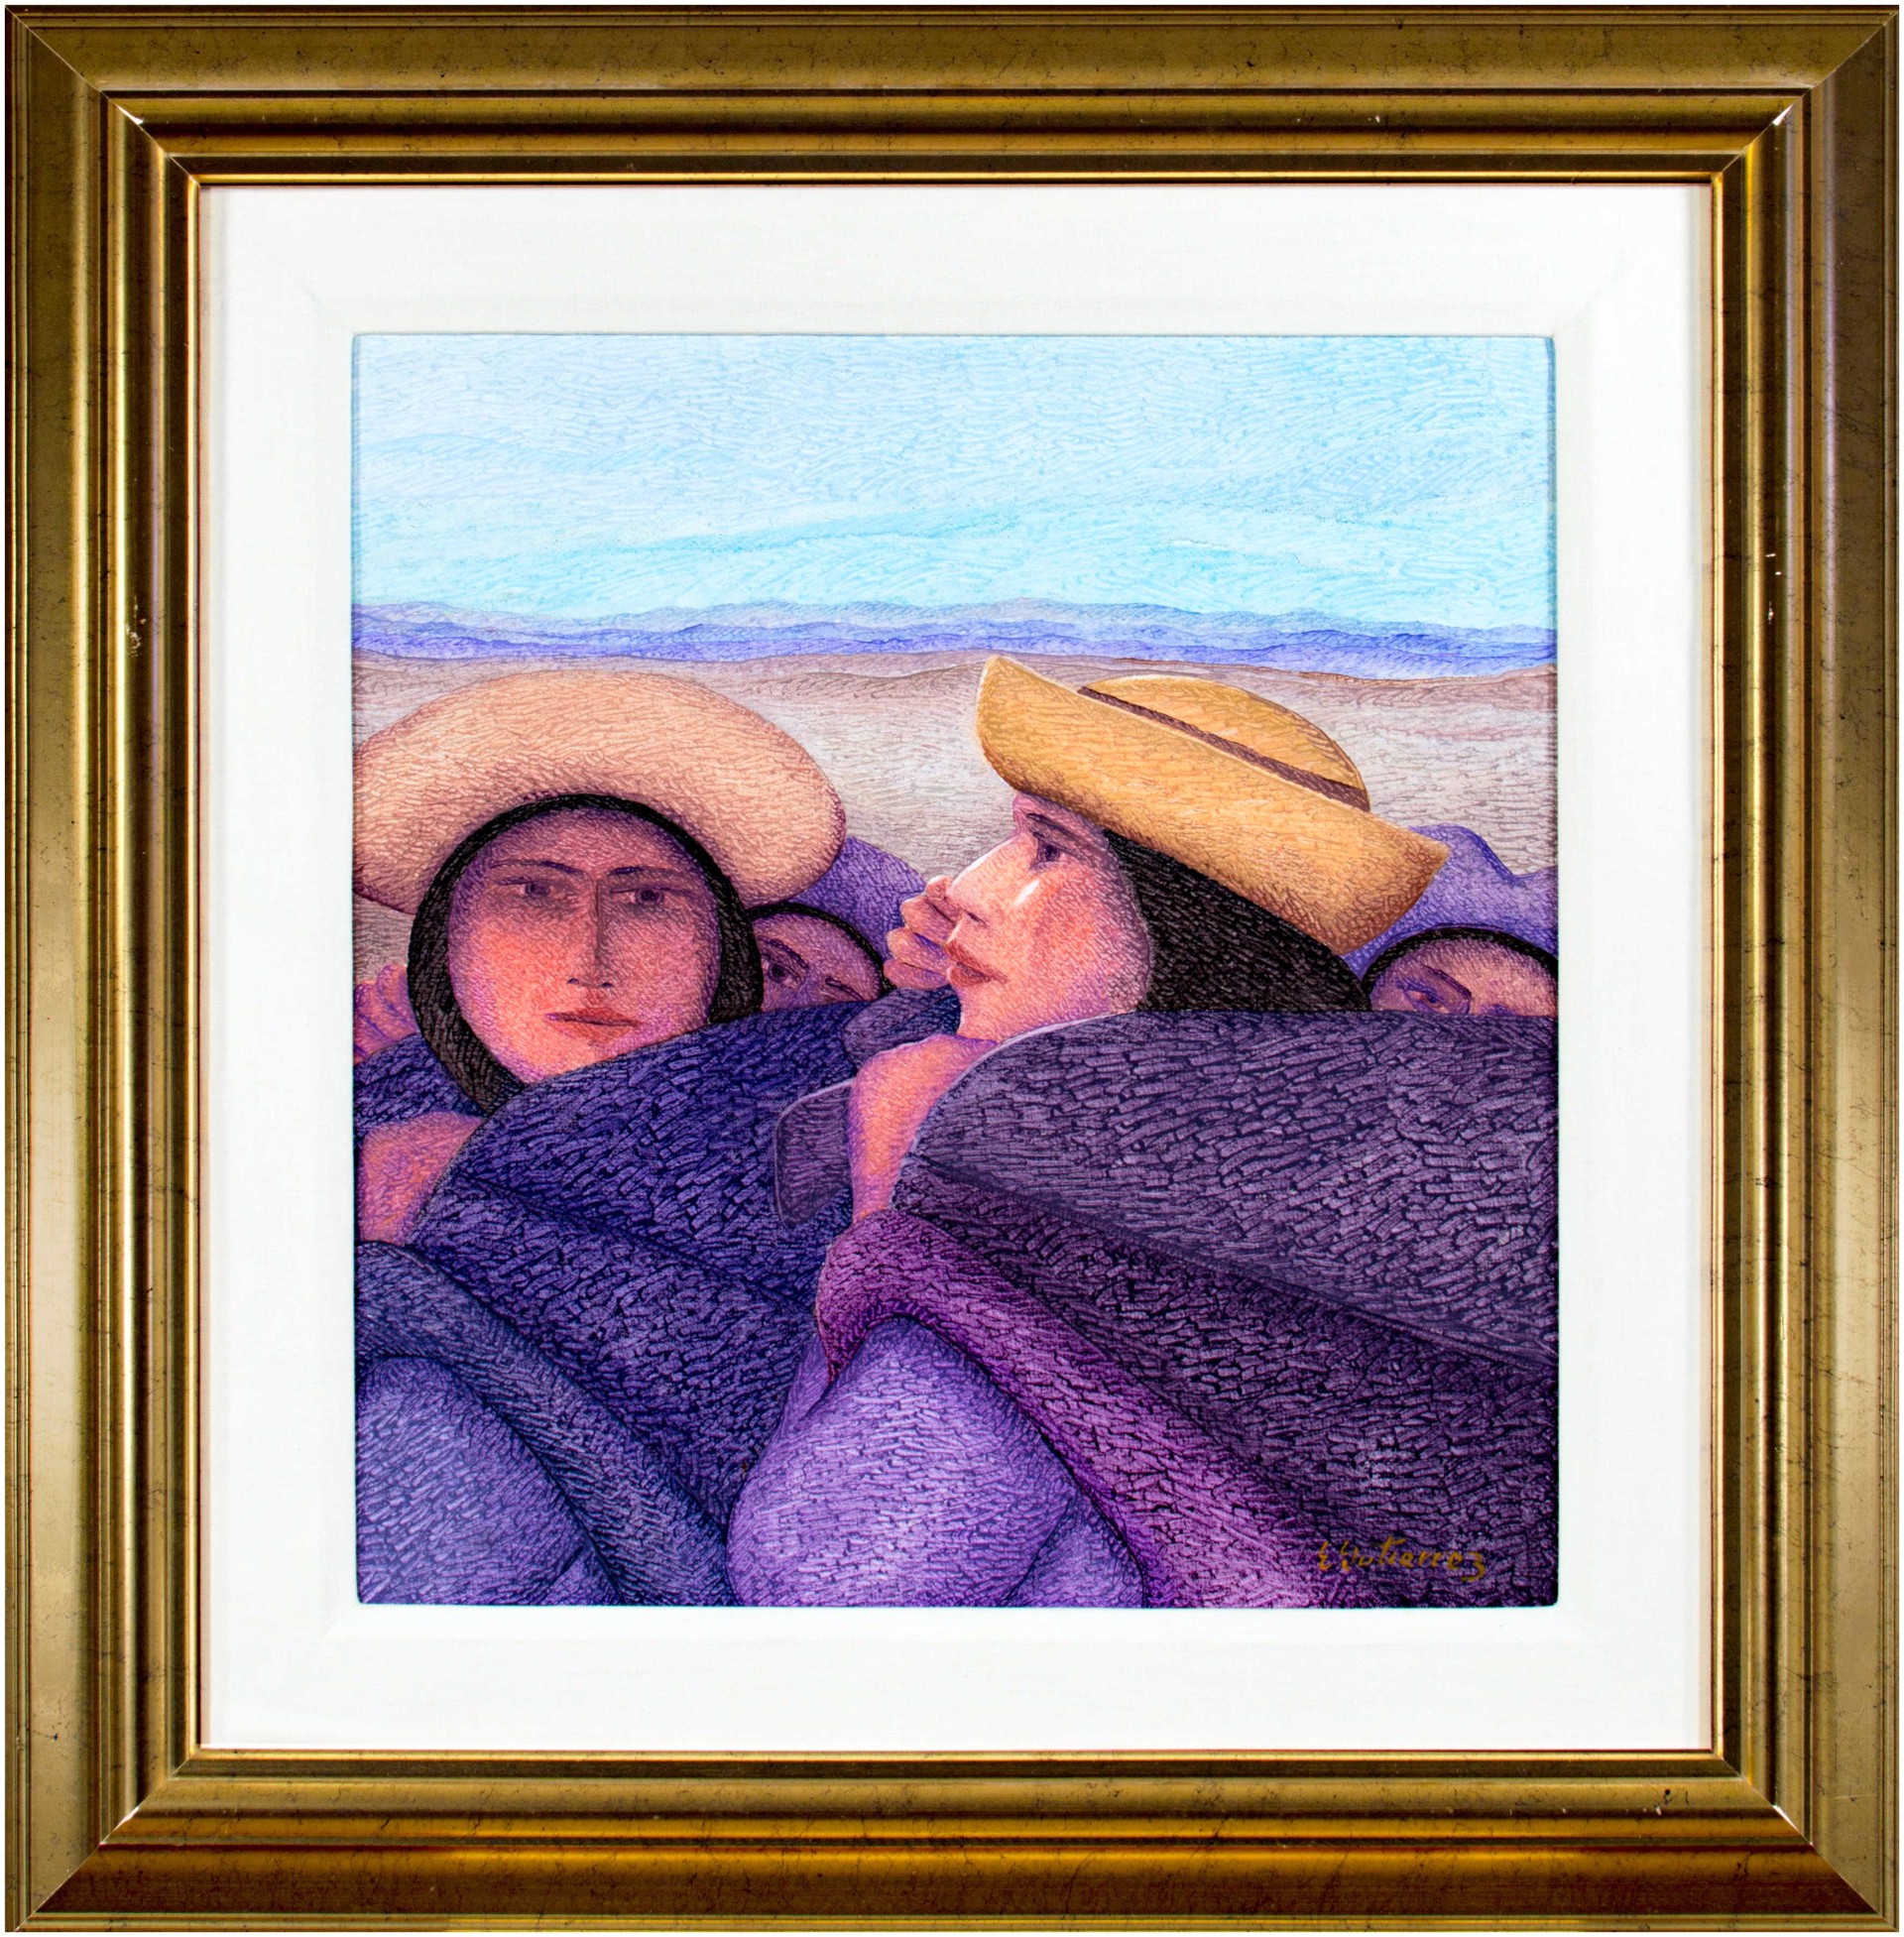 Dos Madres (Two Mothers) by Ernesto Gutierrez